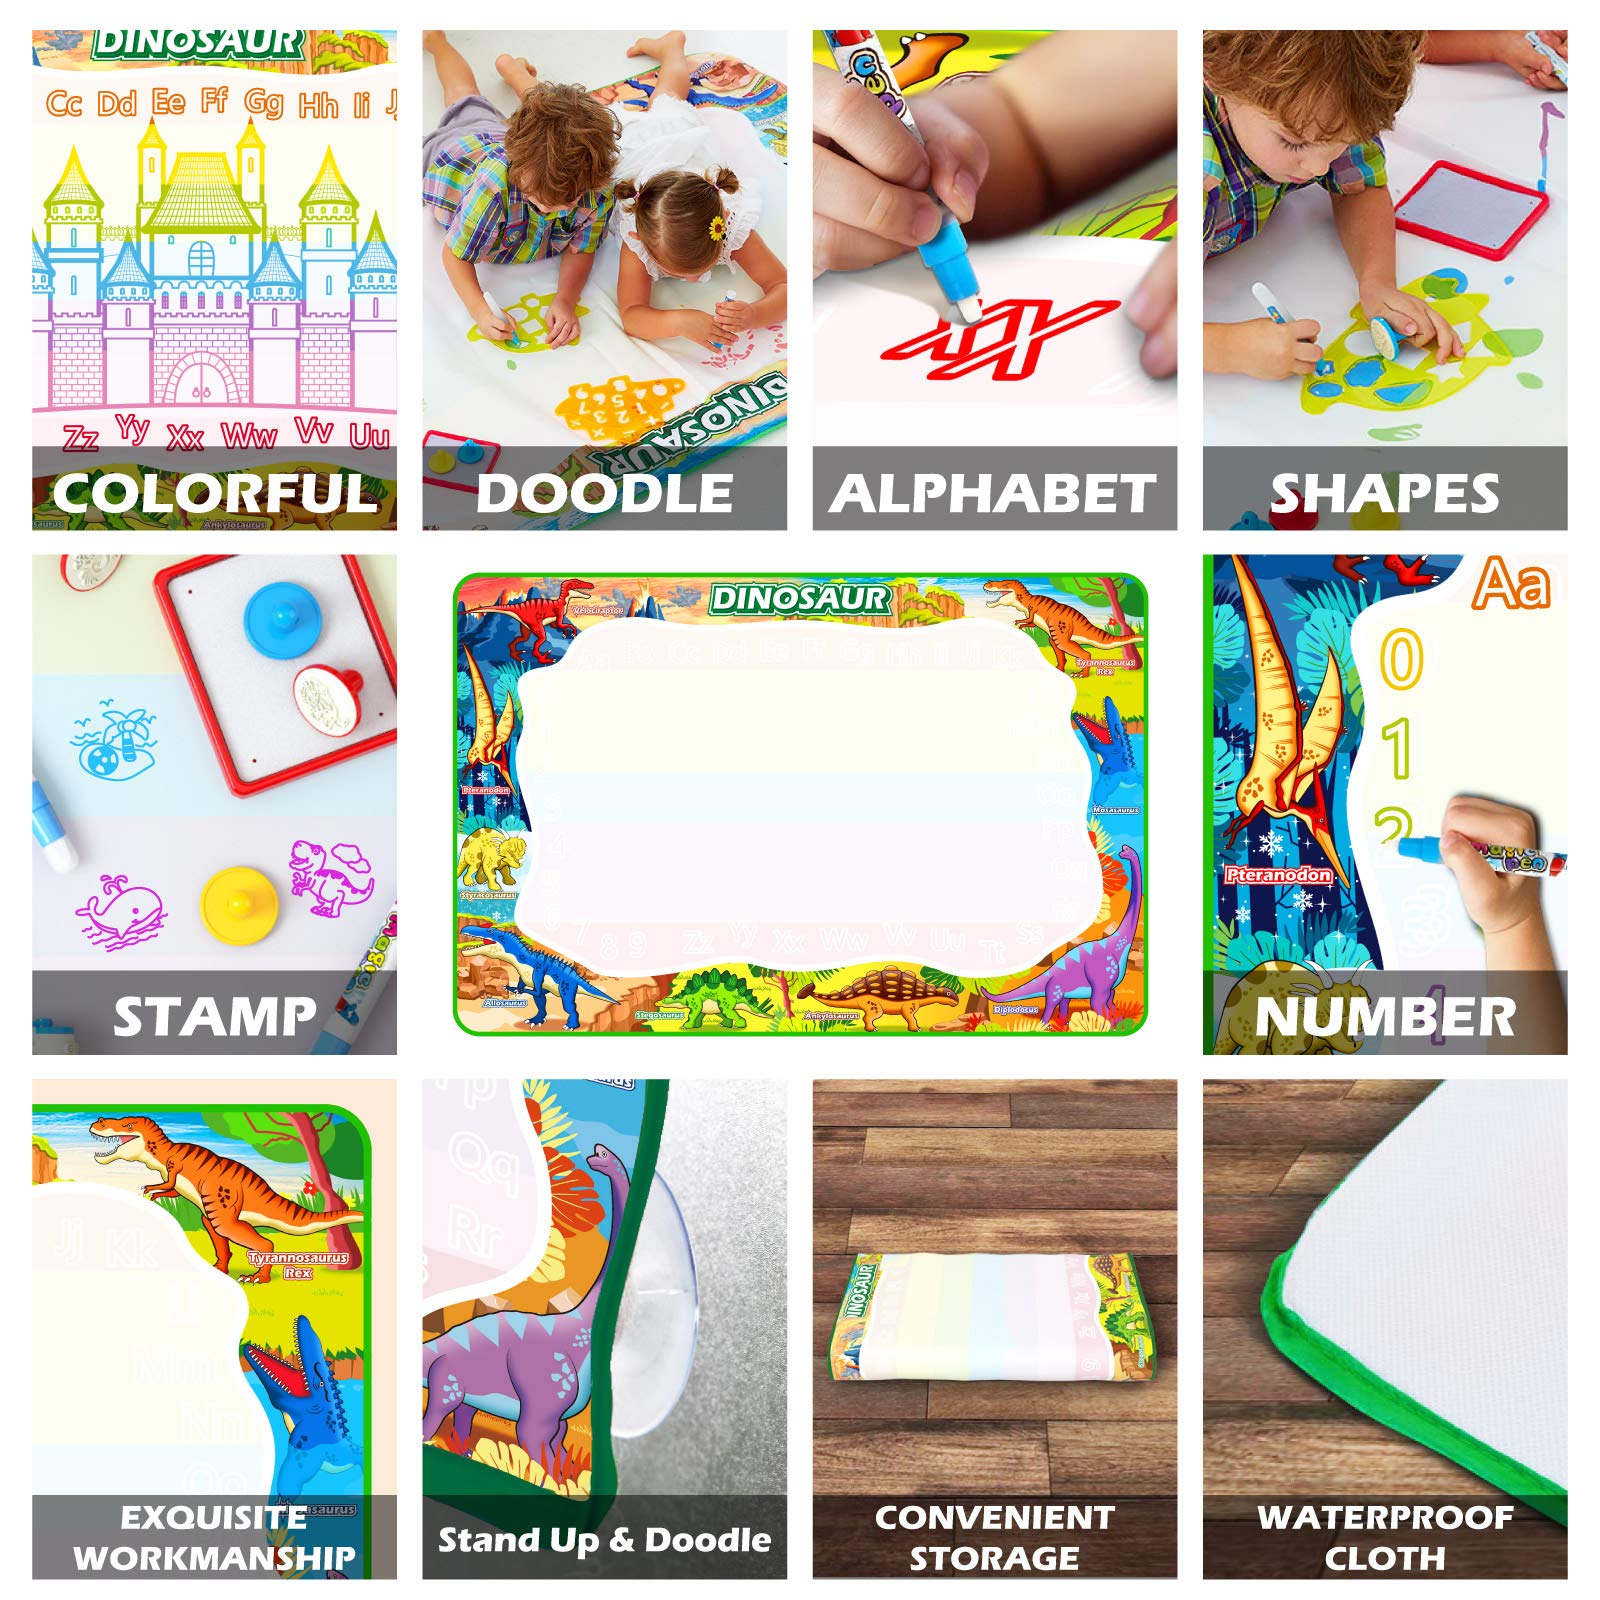 Jasonwell Aqua Magic Doodle Mat - 60 x 40'' XXX-Large Water Drawing Doodling Mat Dinosaur Painting Writing Board Coloring Mat Educational Toy Gift for Kids Toddlers Age 3 4 5 6 7 8 Year Old Girls Boys